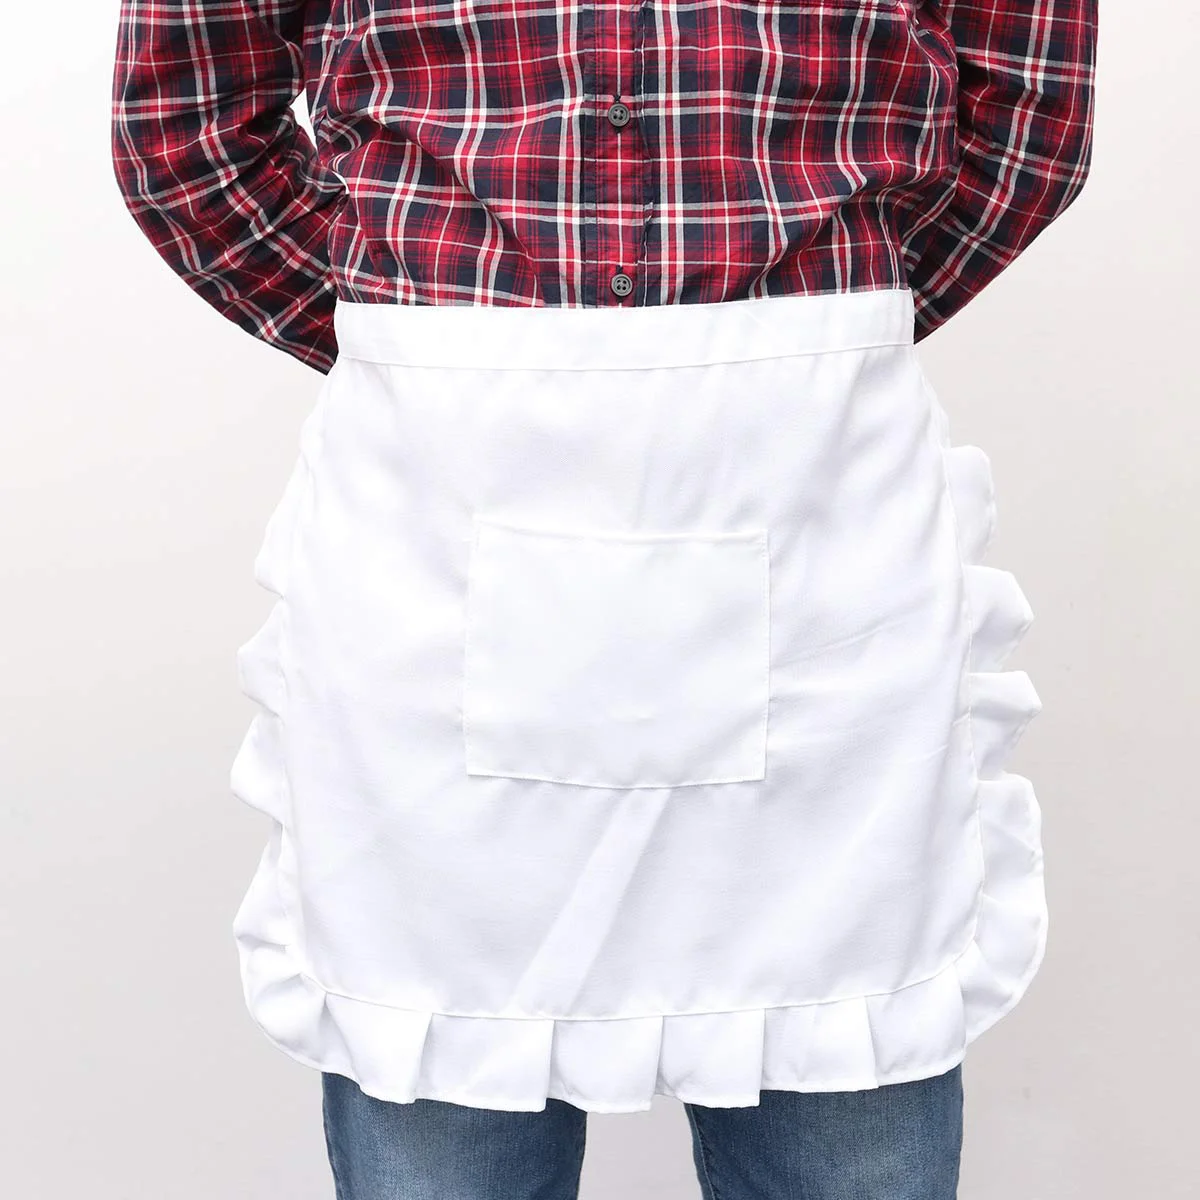 

Waist Apron Maid Costume with Pocket Floral Cook Apron Kitchen Party Favors for Waitress ( White )